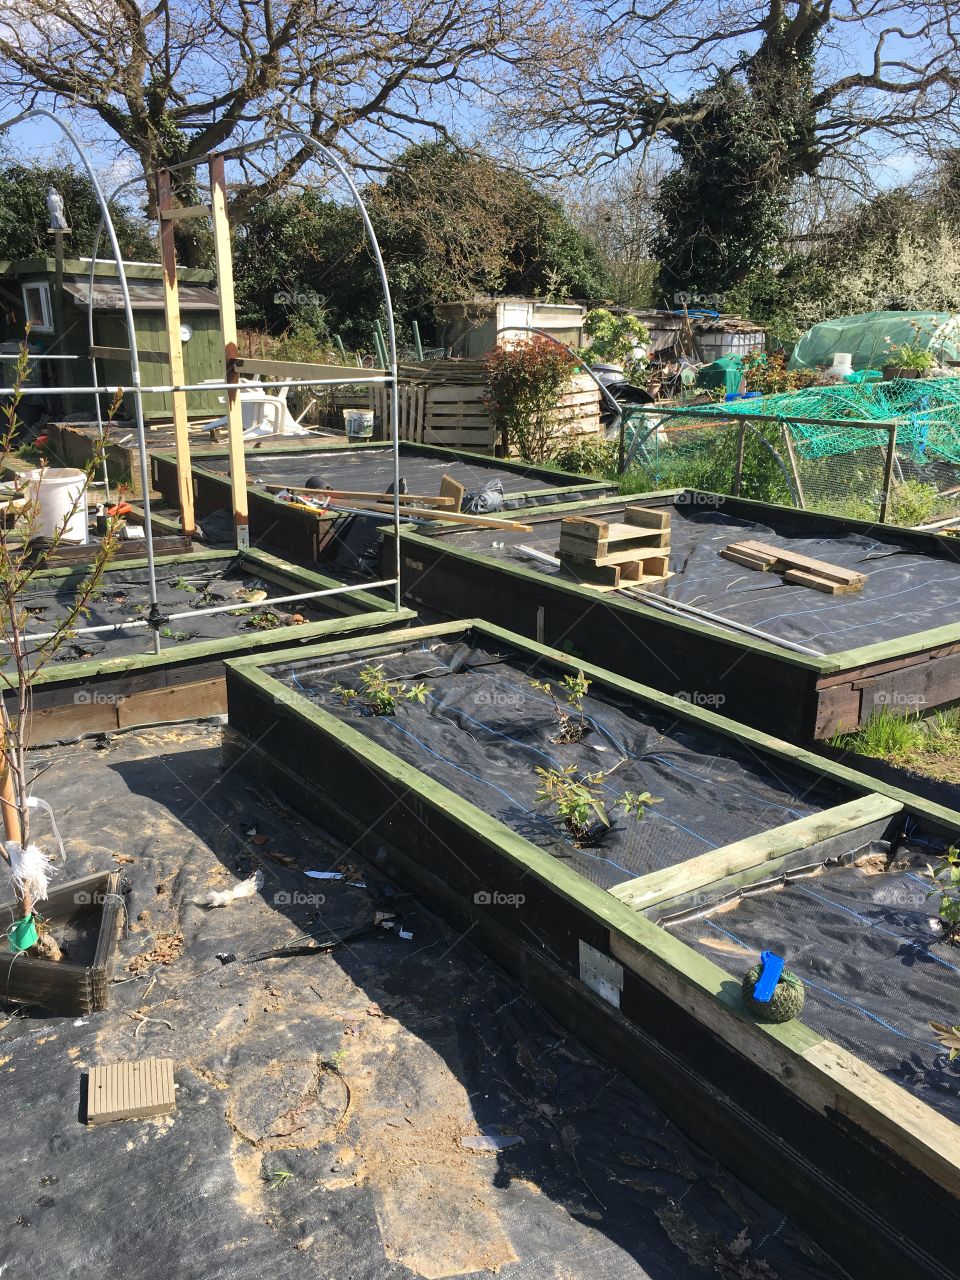 Getting allotment ready for growing